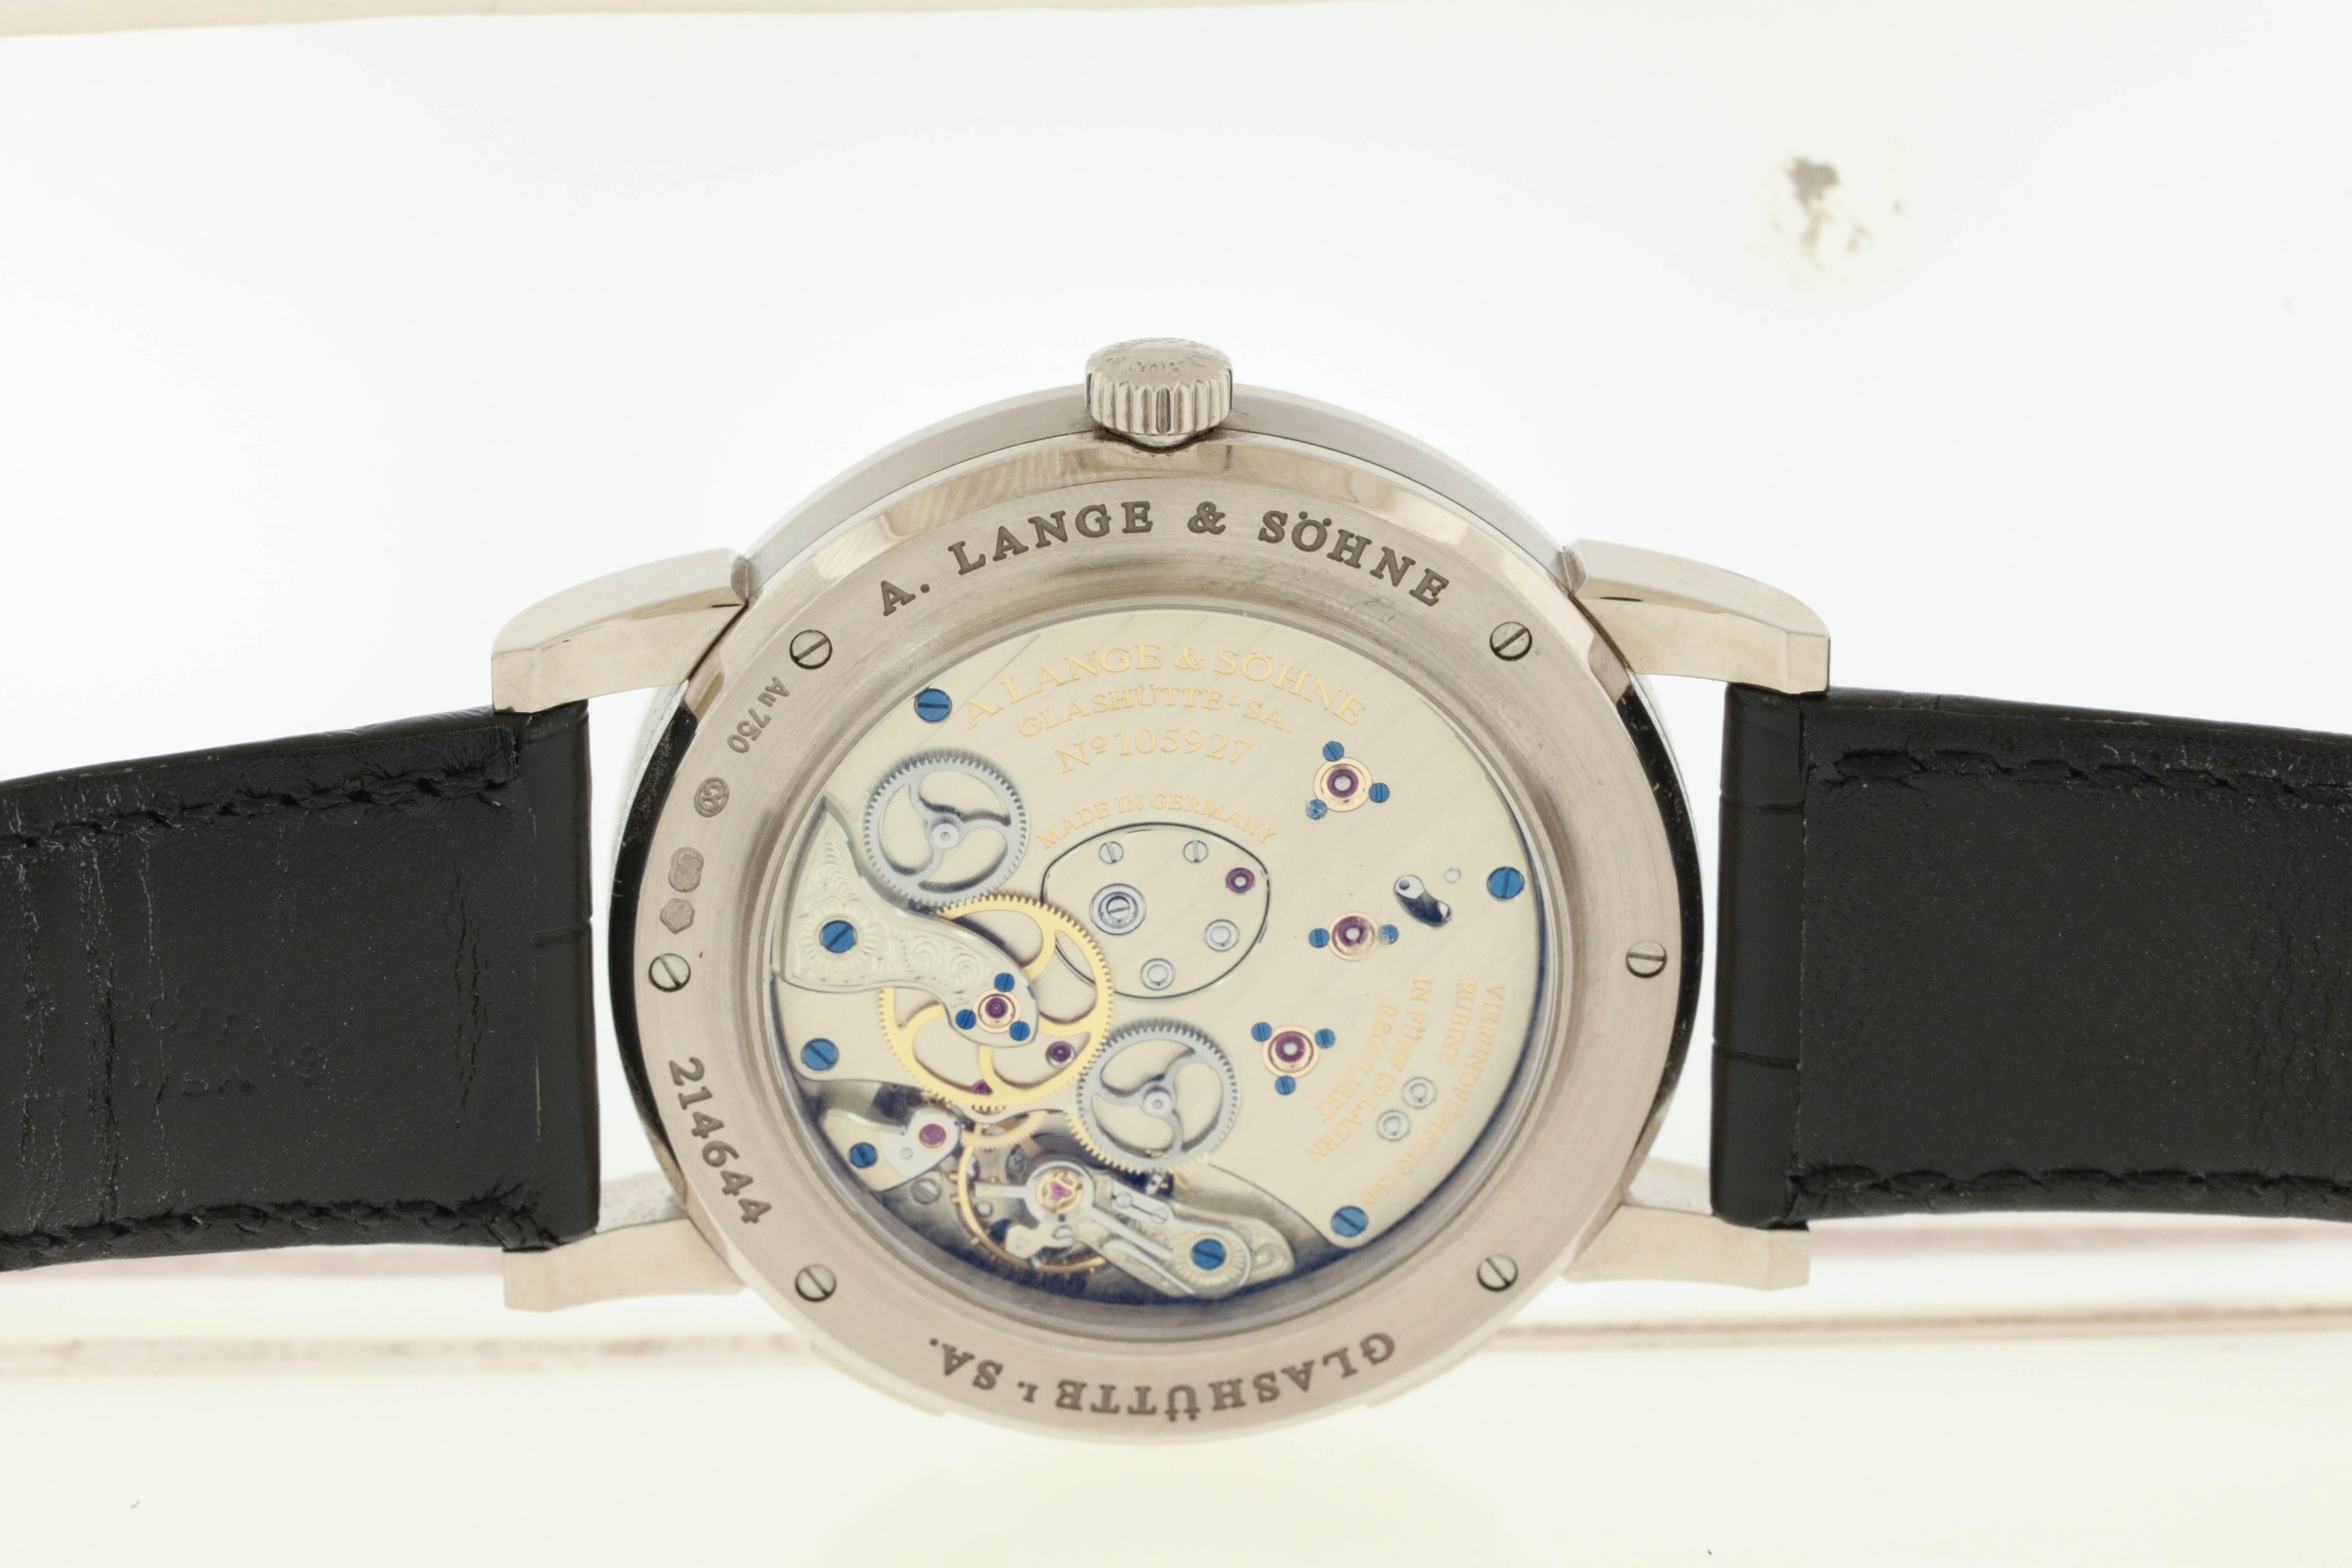 18K platinum A. Lange & Söhne twin barrel wristwatch with oversized date and power reserve, circa 1997, is a 38.5mm wristwatch with see-through back and Lange platinum buckle. The silvered matte dial features applied lozenge-shaped and Roman